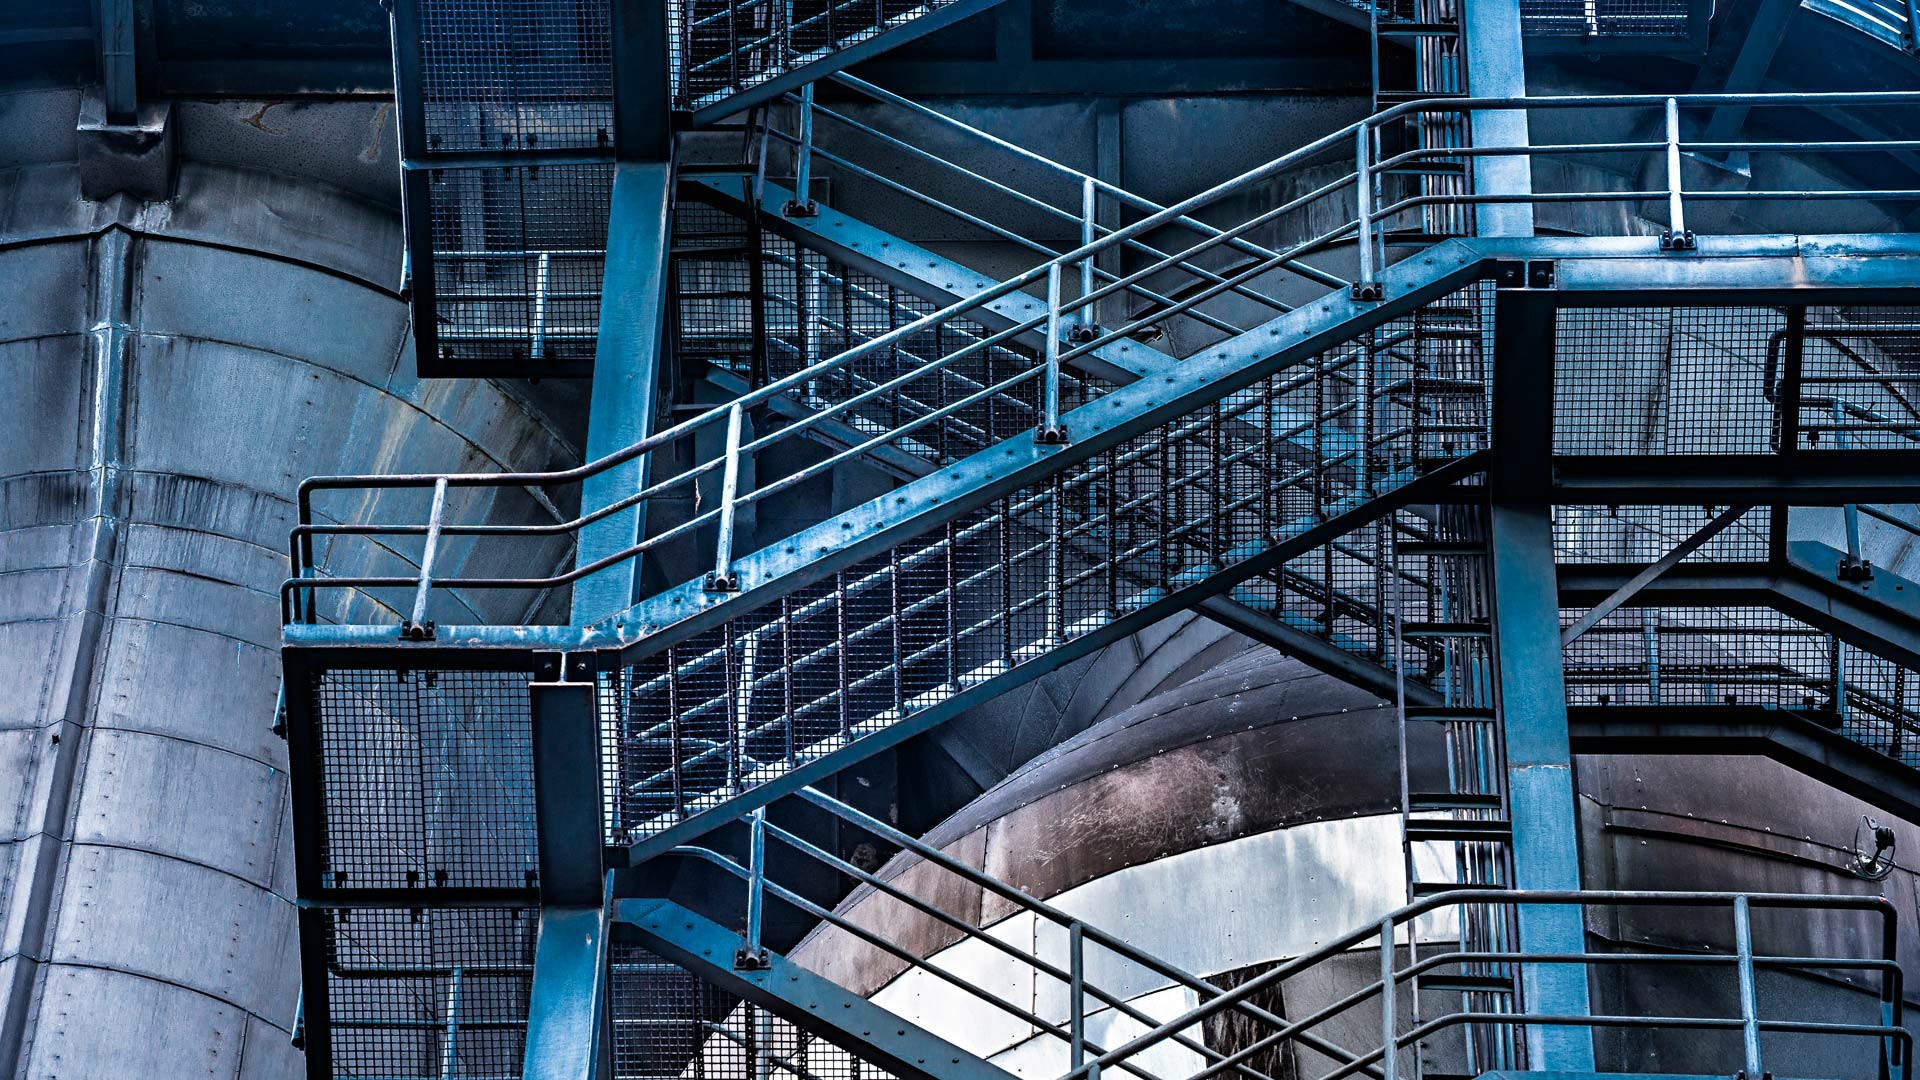 Stairs Factories Building Industrial Blue Factory 1920x1080